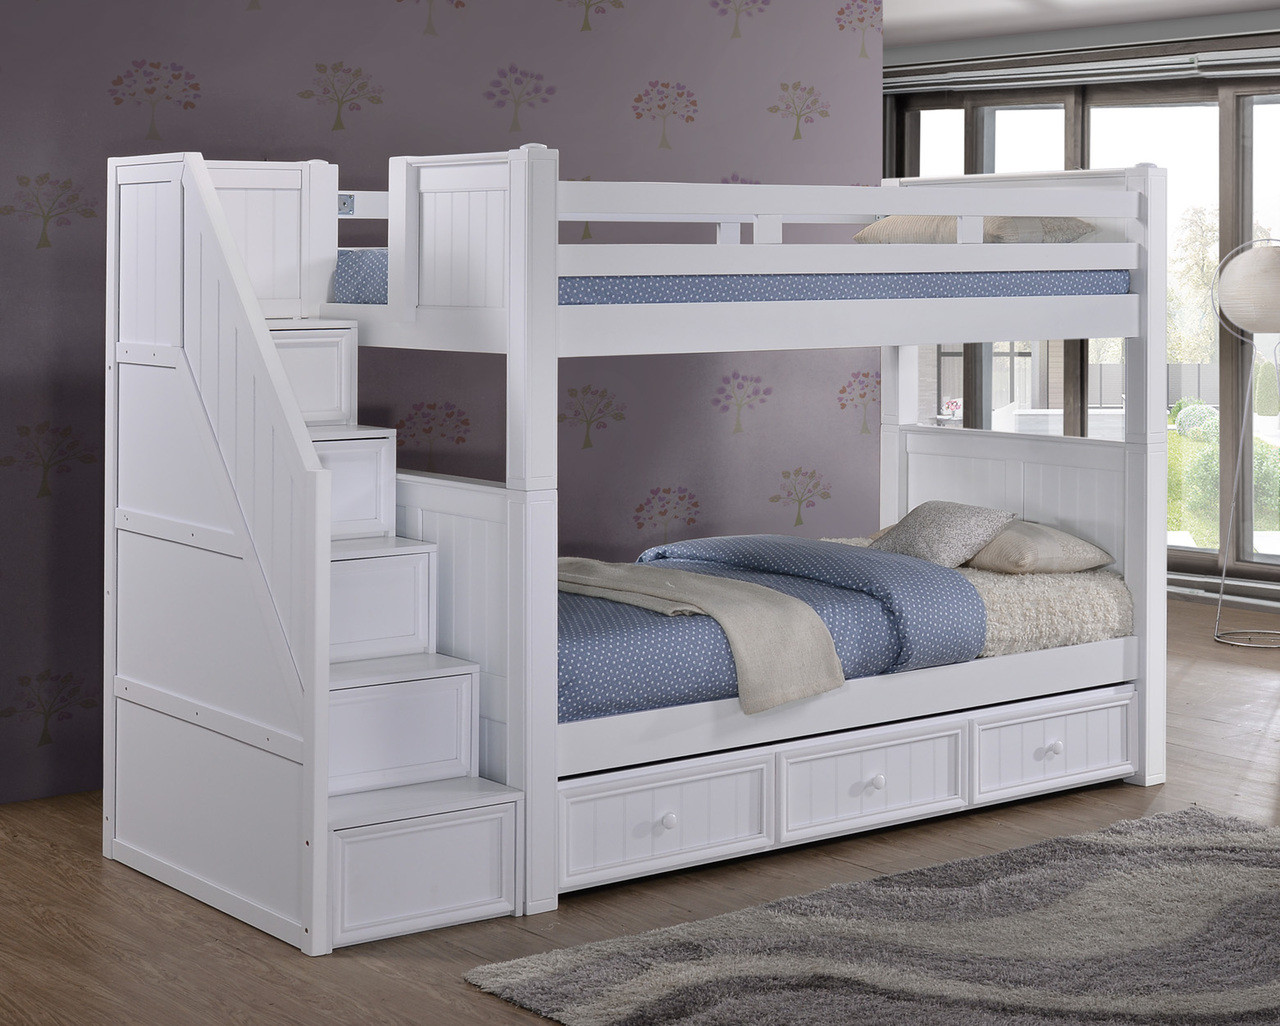 Dillon White Twin Bunk Bed with Storage Stairs | Bunk Beds ...